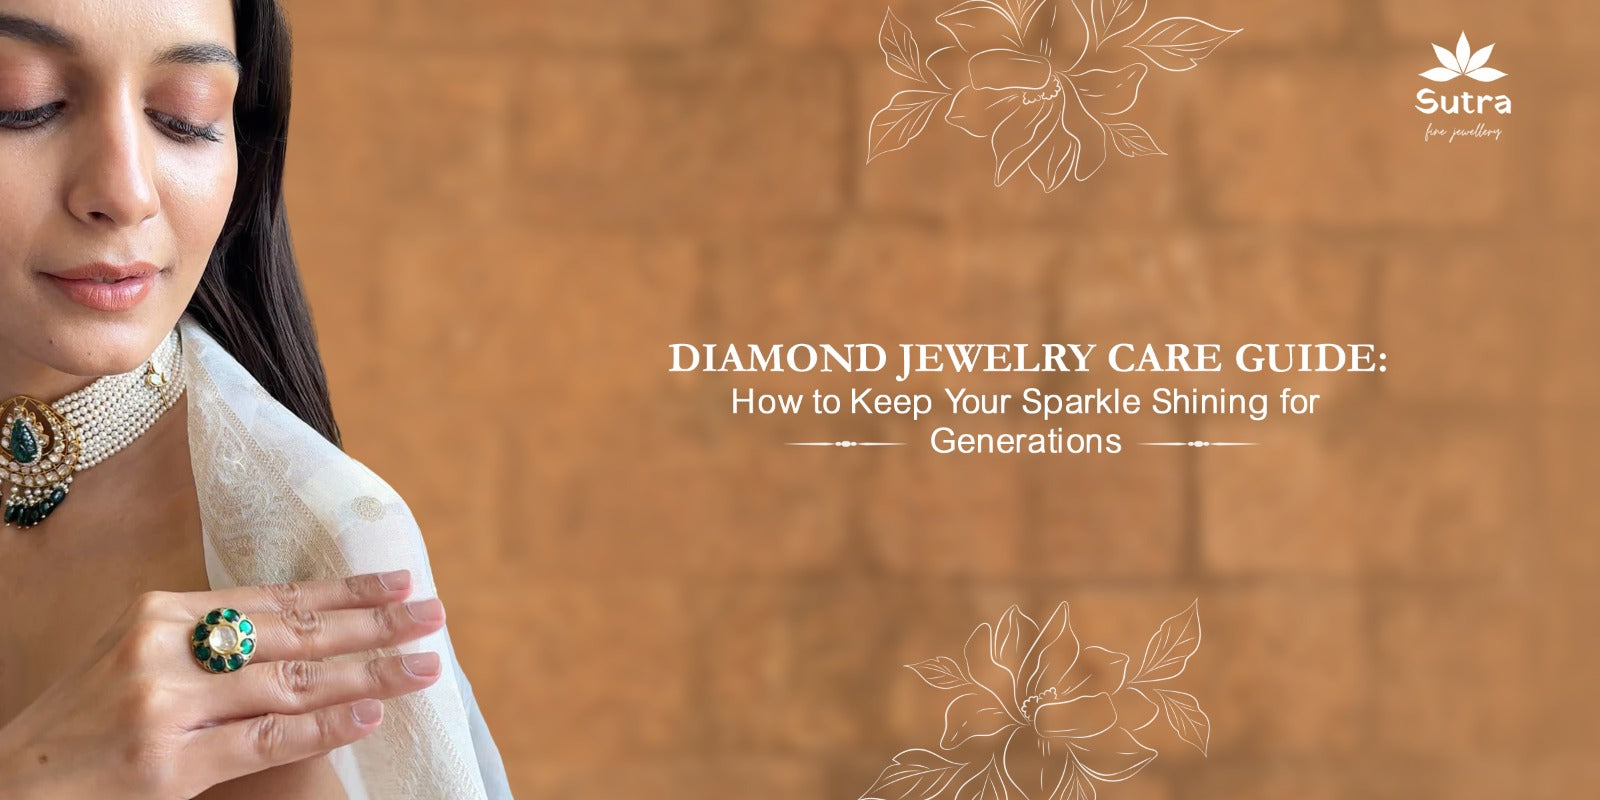 Diamond Jewelry Care Guide: How to Keep Your Sparkle Shining for Generations